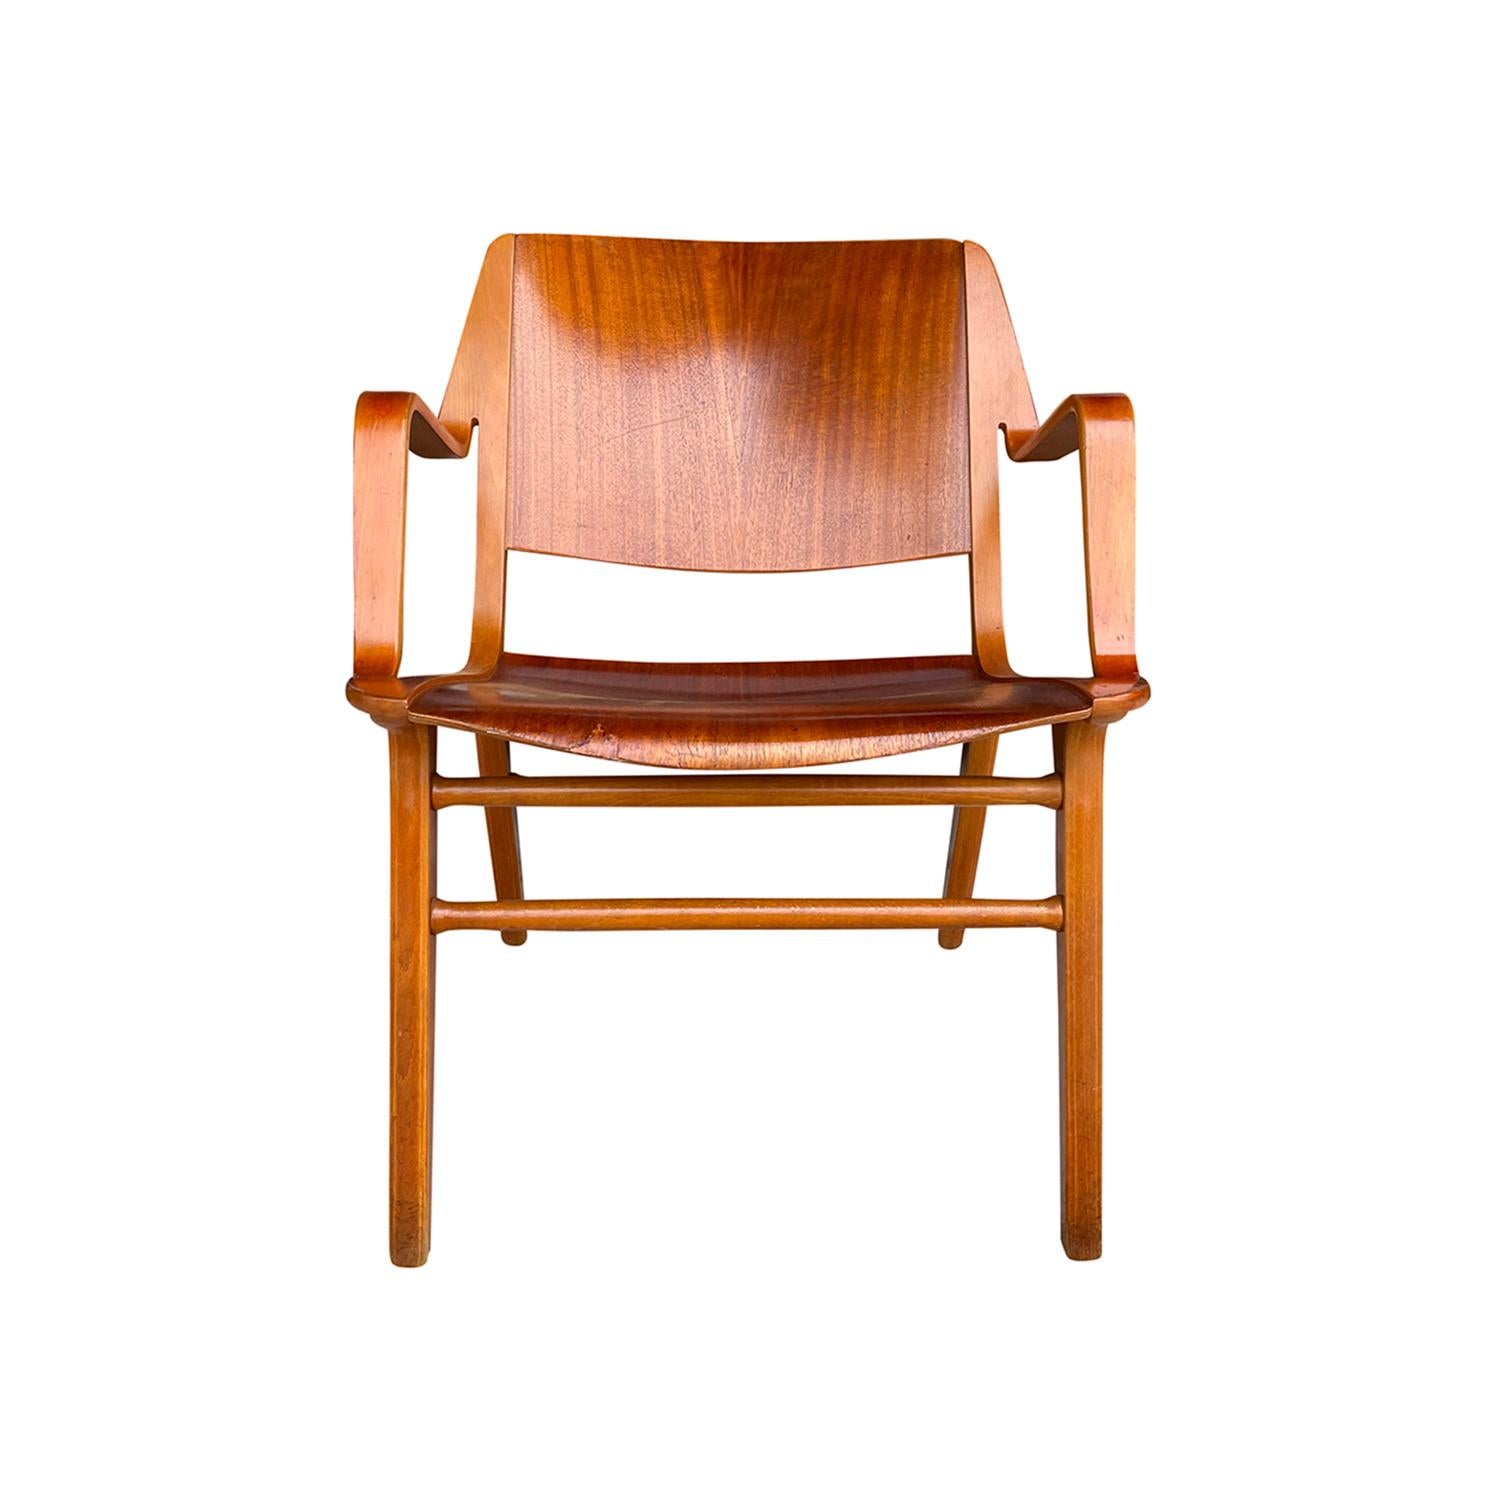 A light-brown, vintage Mid-Century Modern Danish wooden side armchair, designed by Peter Hvidt & Orla Mølgaard - Nielsen and produced by Fritz Hansen. The chair is formed with laminated Beechwood, the seat is made of hand carved Teakwood and